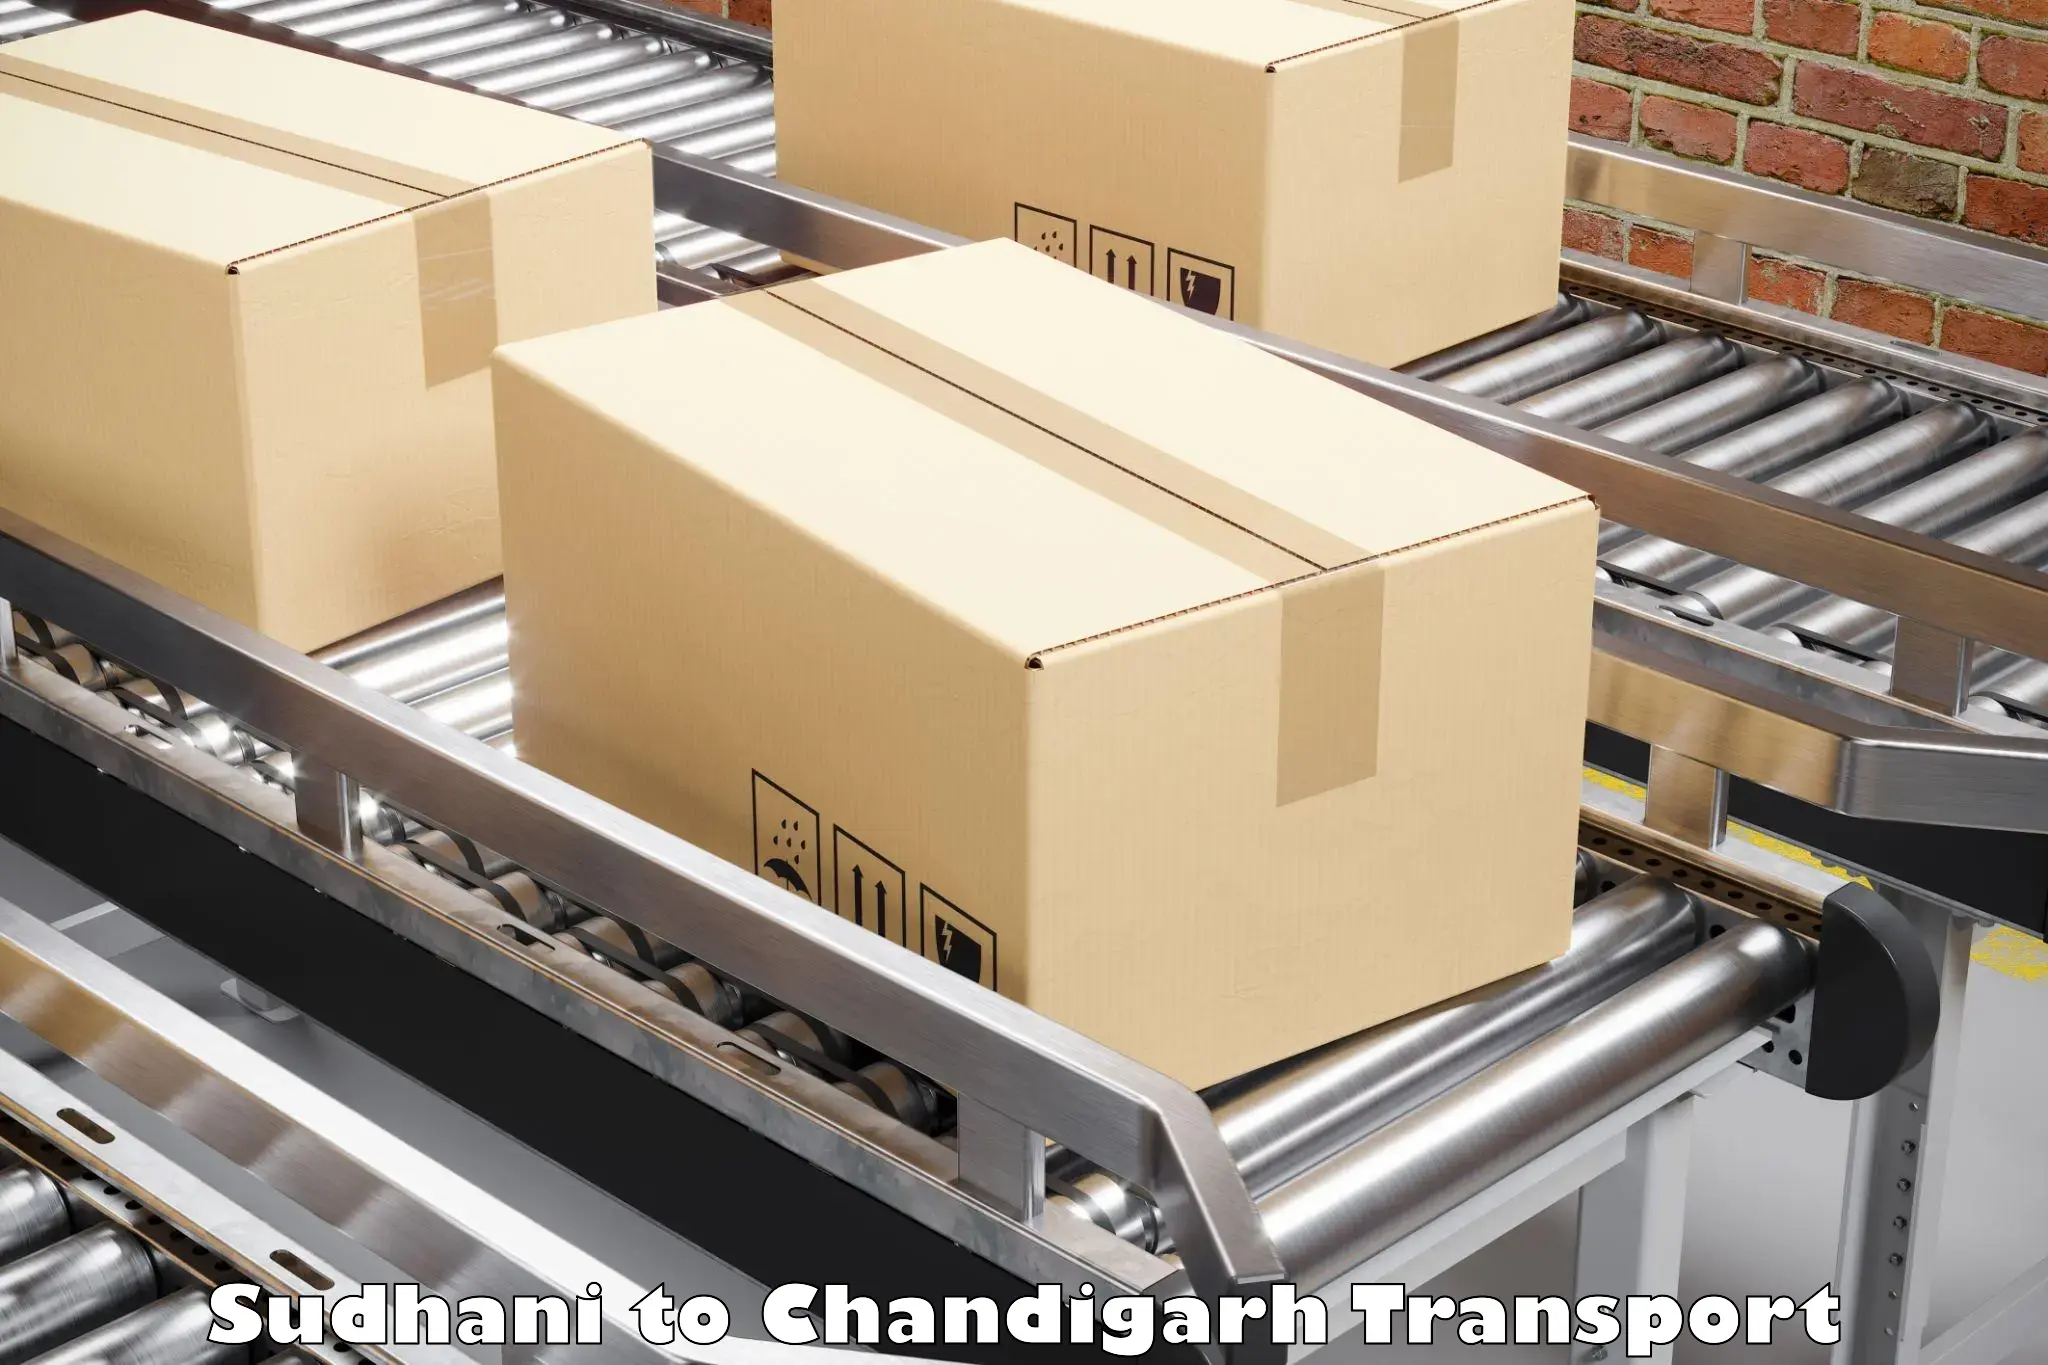 Container transport service Sudhani to Chandigarh